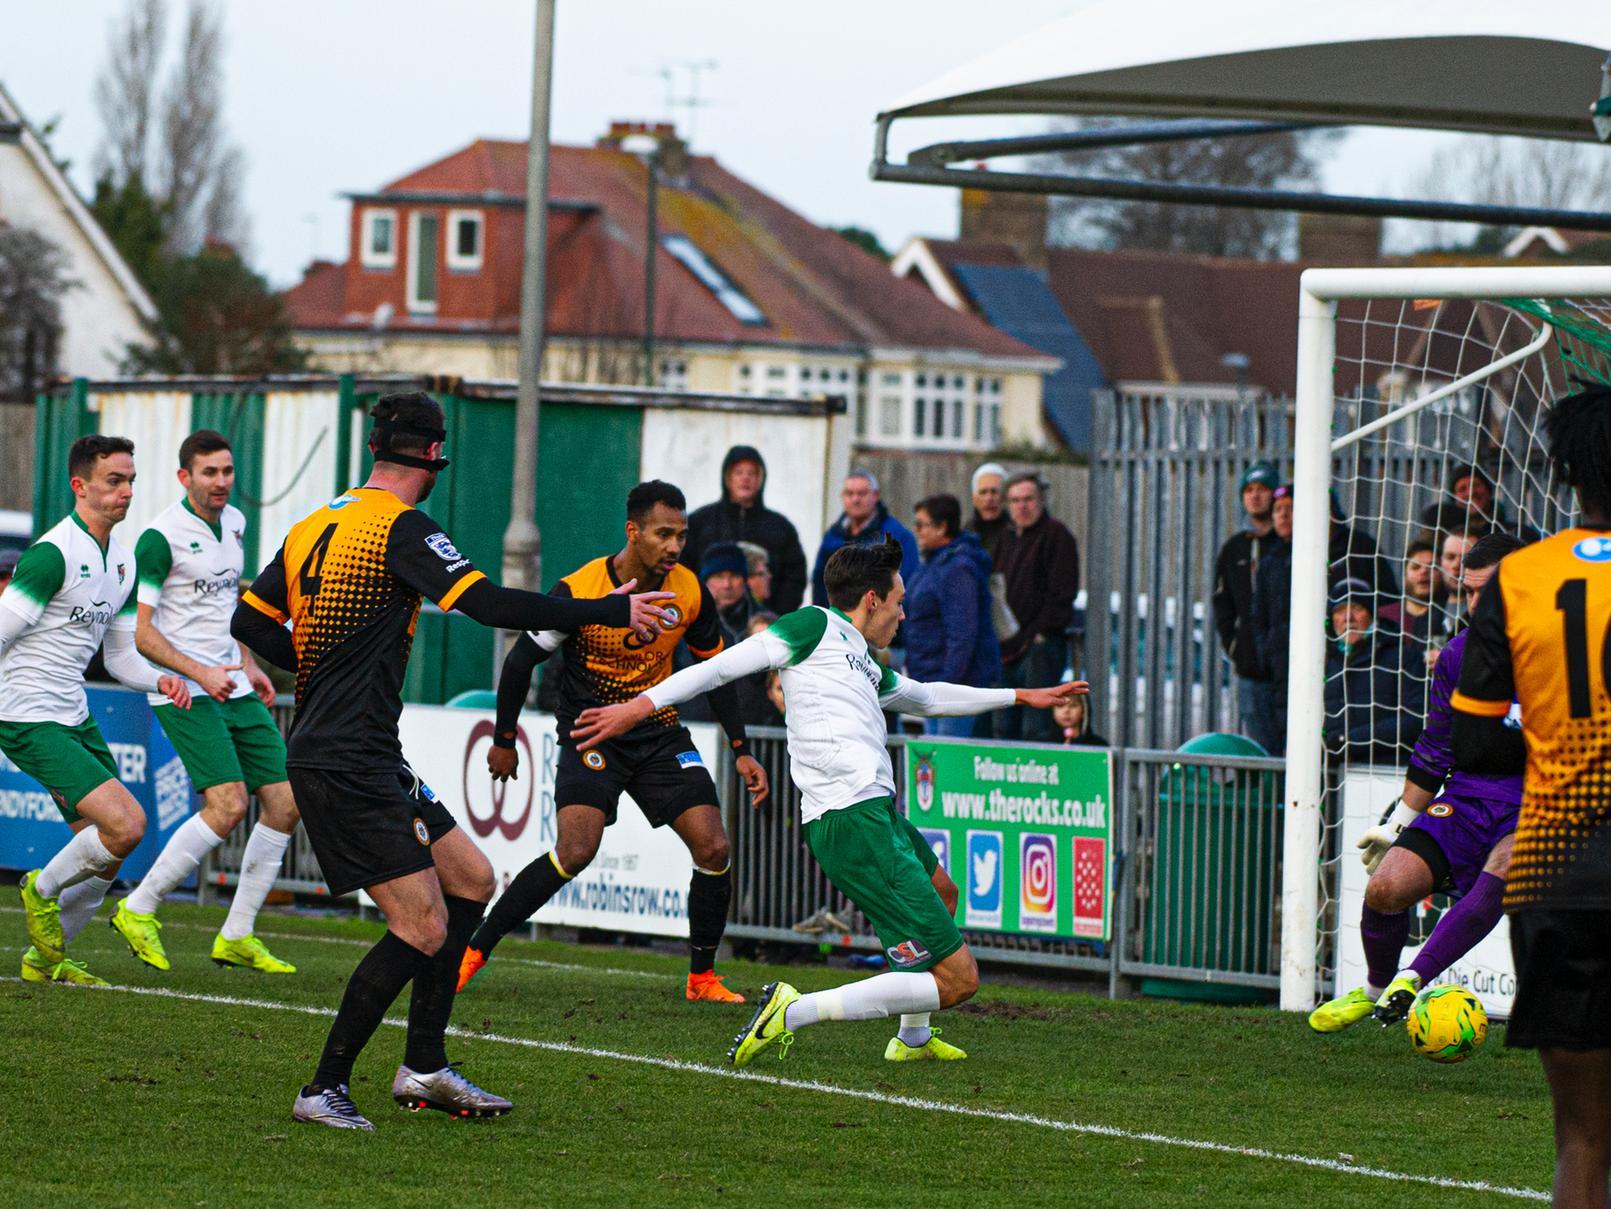 Bognor v Cray - goals and celebrations / Pictures: Tommy McMillan